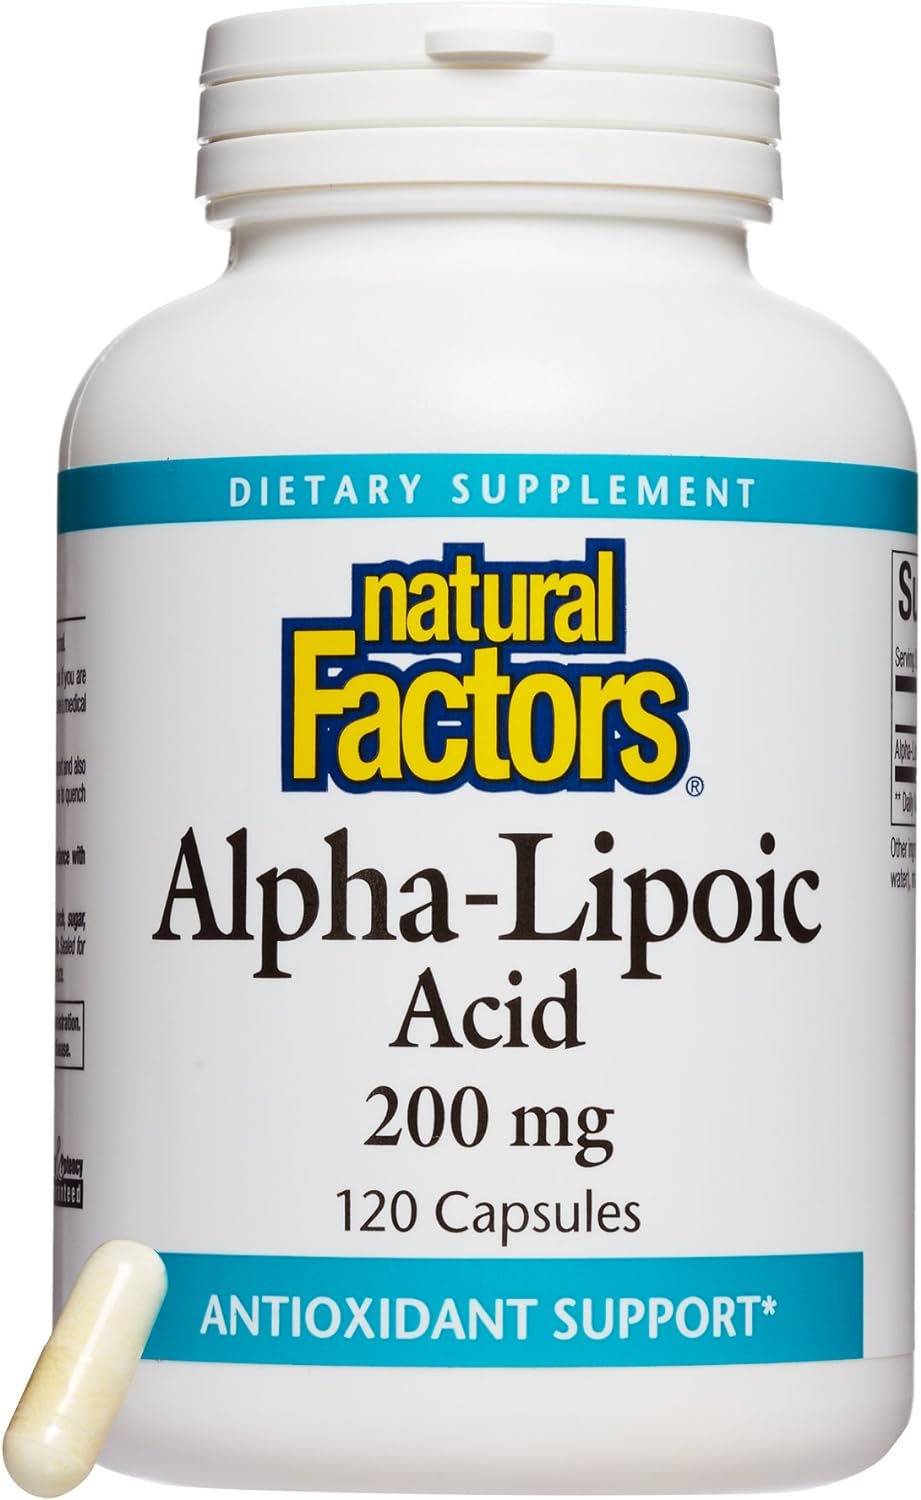 Natural Factors, Alpha-Lipoic Acid 200 mg, Antioxidant Support to Help Maintain Glucose Levels Already in a Normal Range, 120 Capsules (120 Servings)